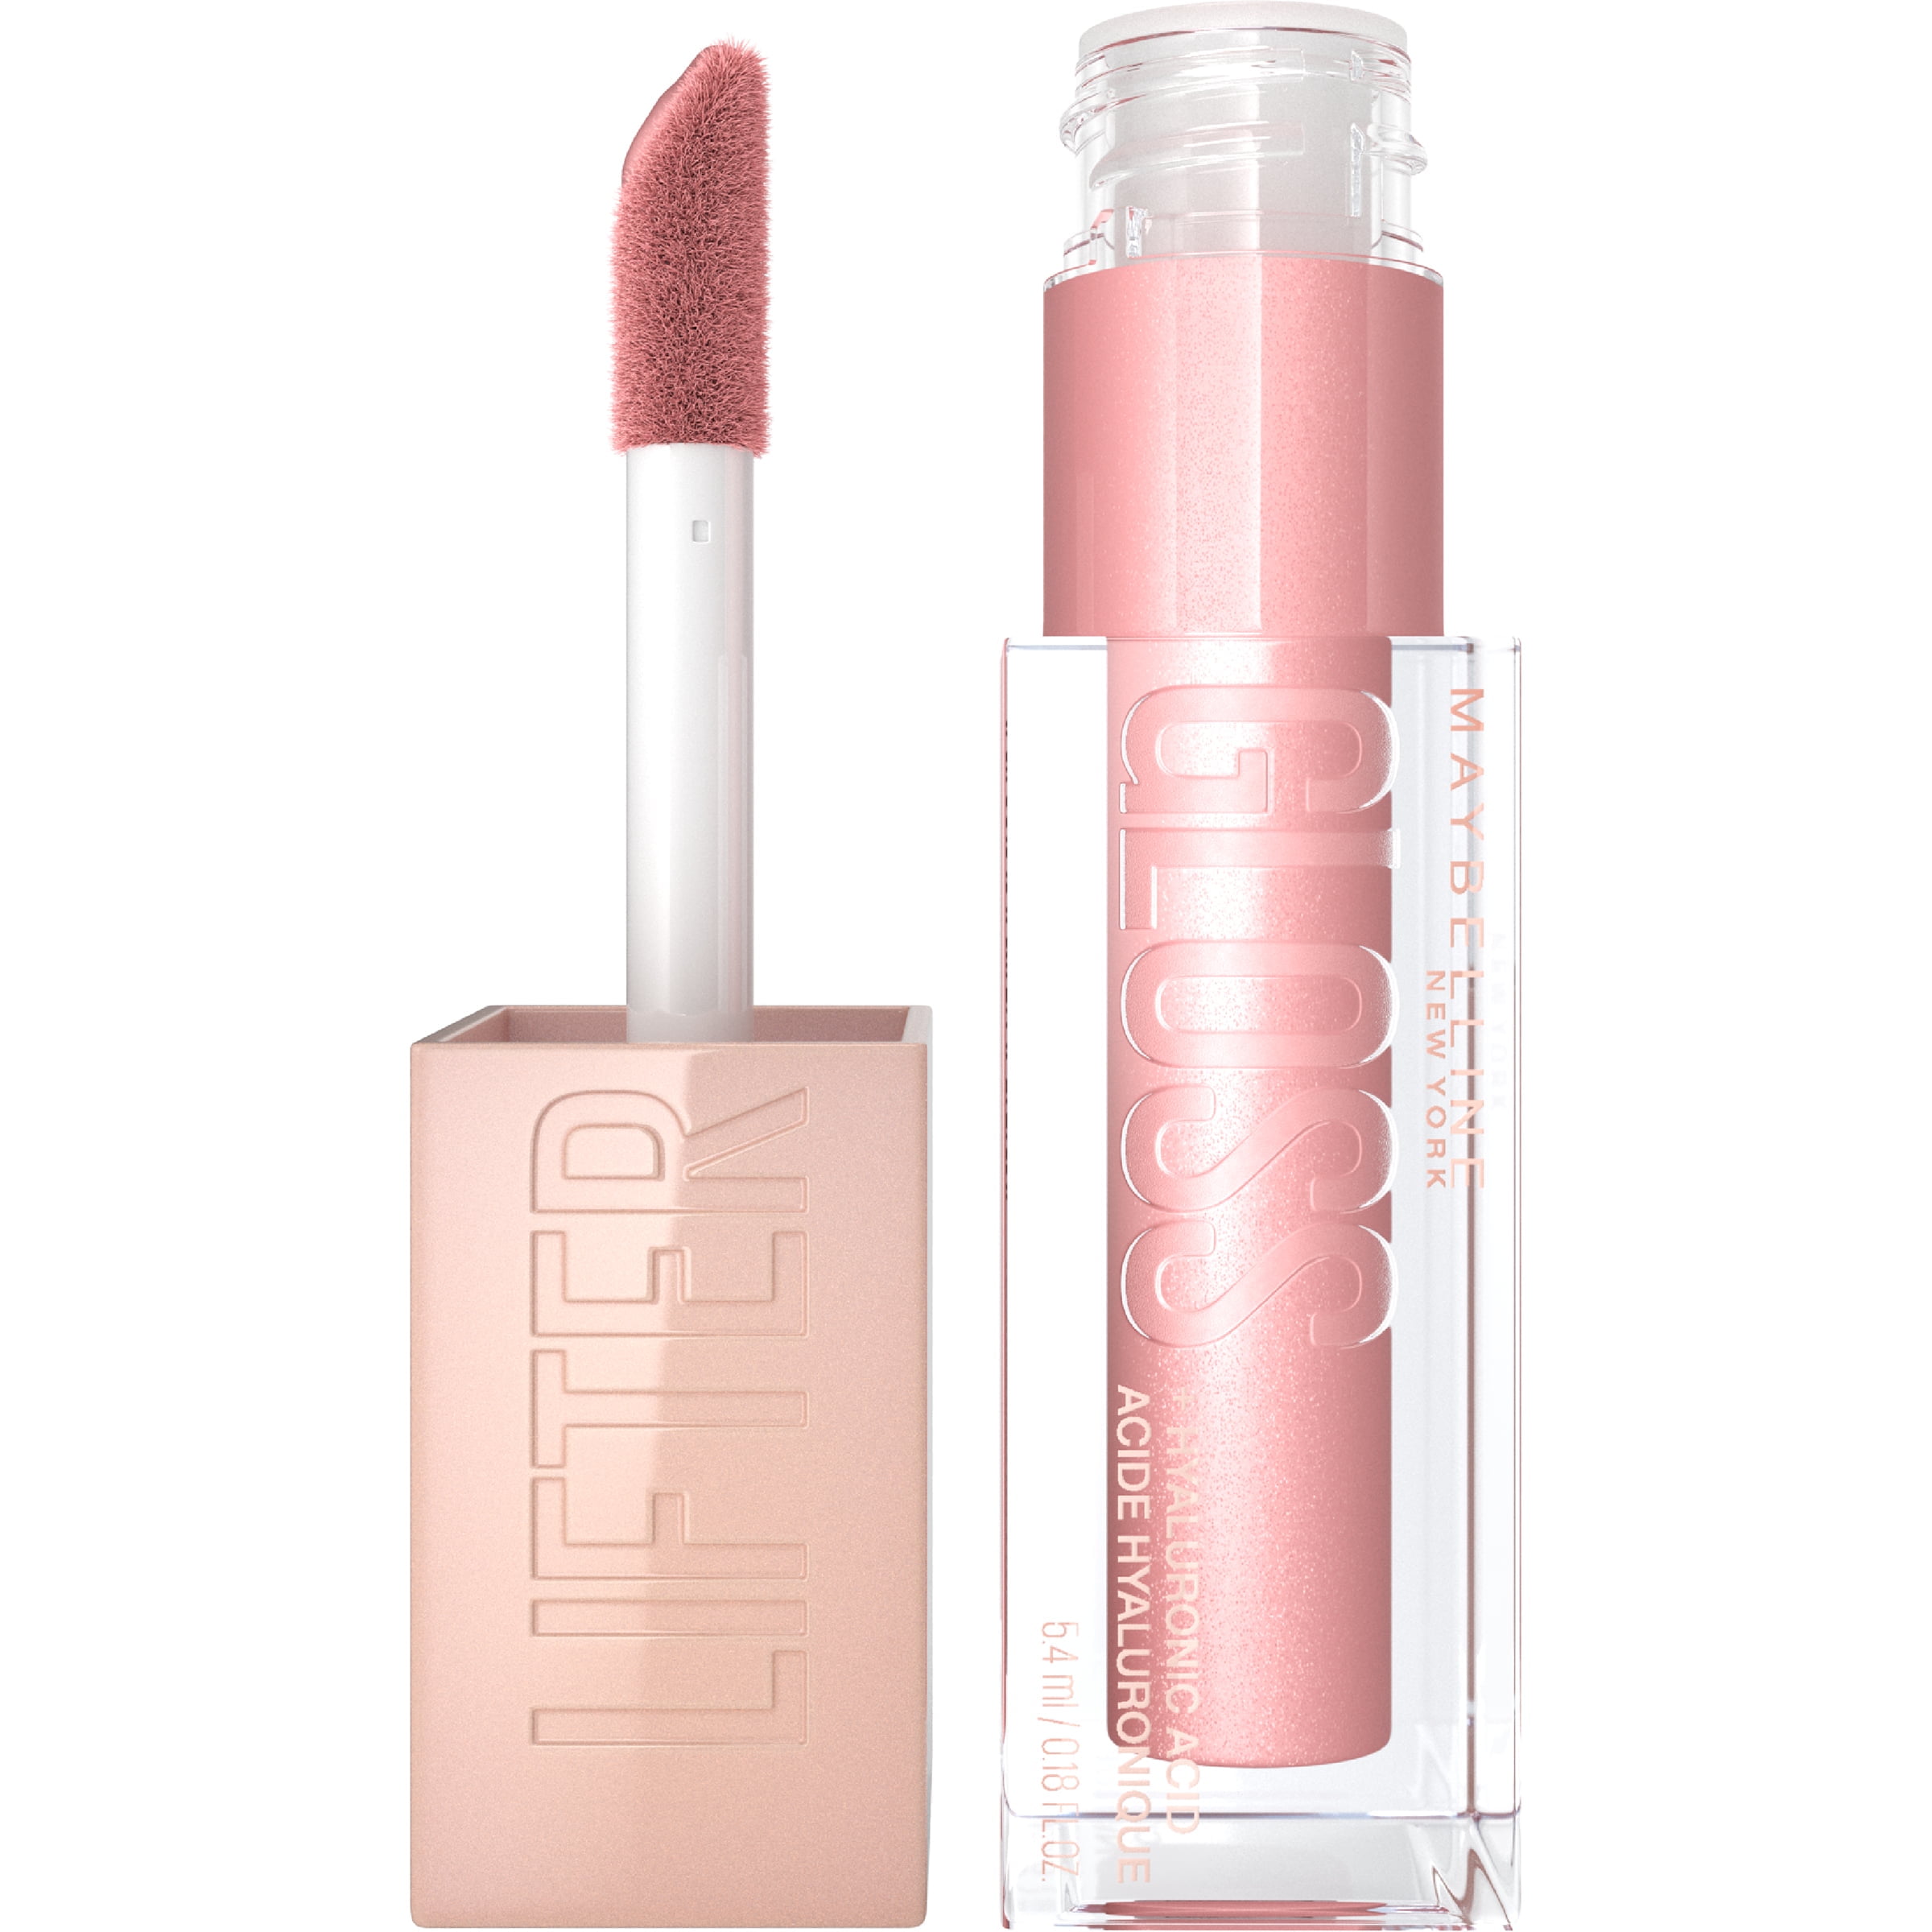 Maybelline Lifter Gloss Lip Gloss Makeup with Hyaluronic Acid, Opal